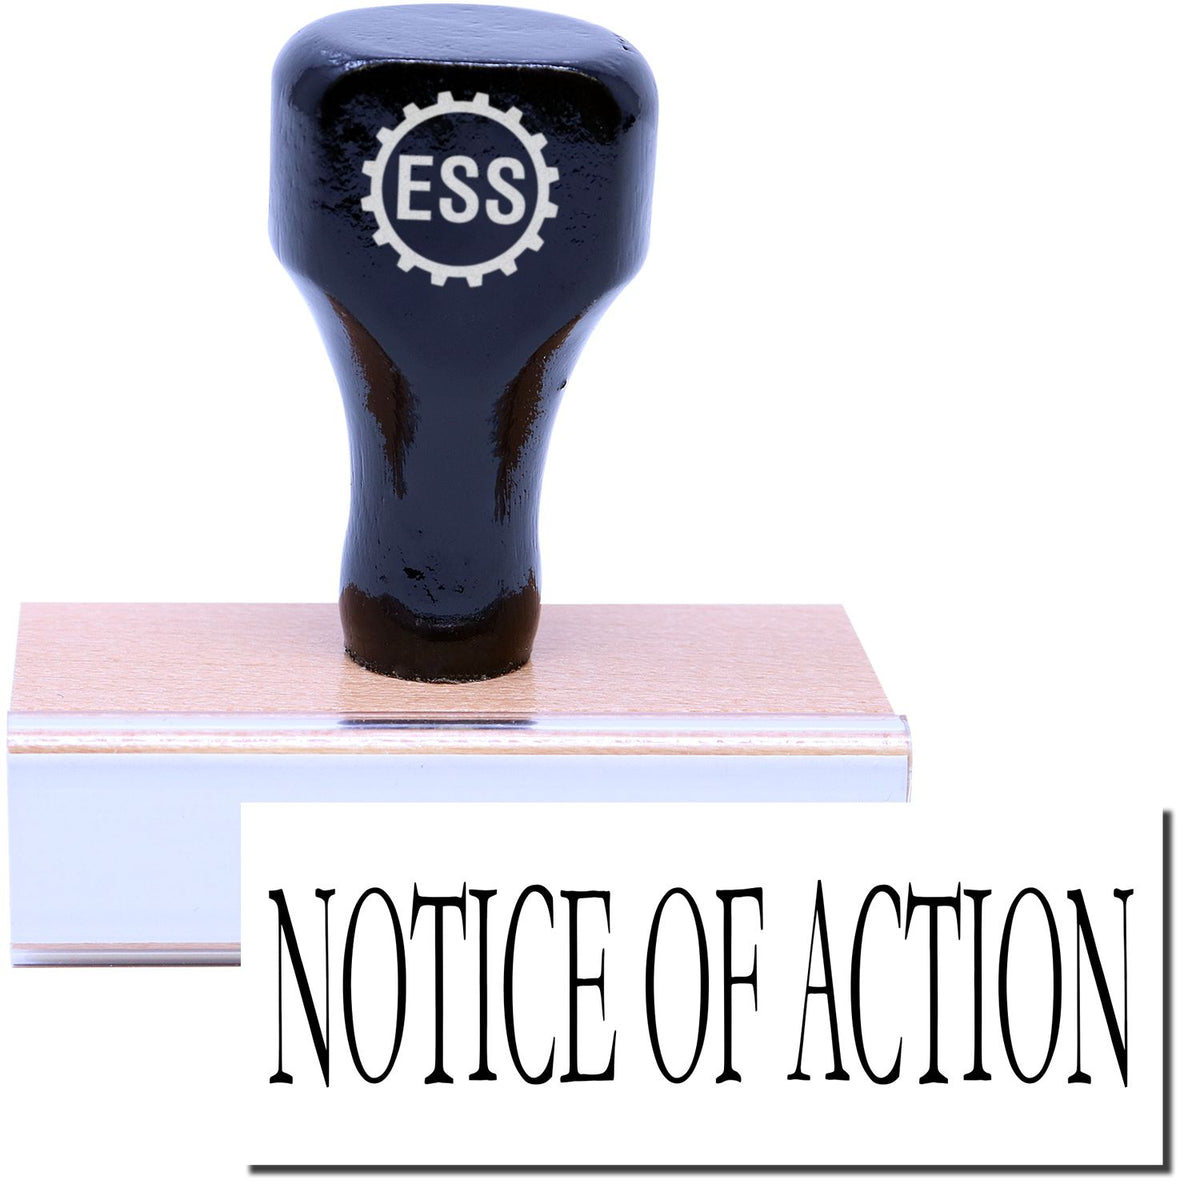 A stock office rubber stamp with a stamped image showing how the text &quot;NOTICE OF ACTION&quot; in a large font is displayed after stamping.